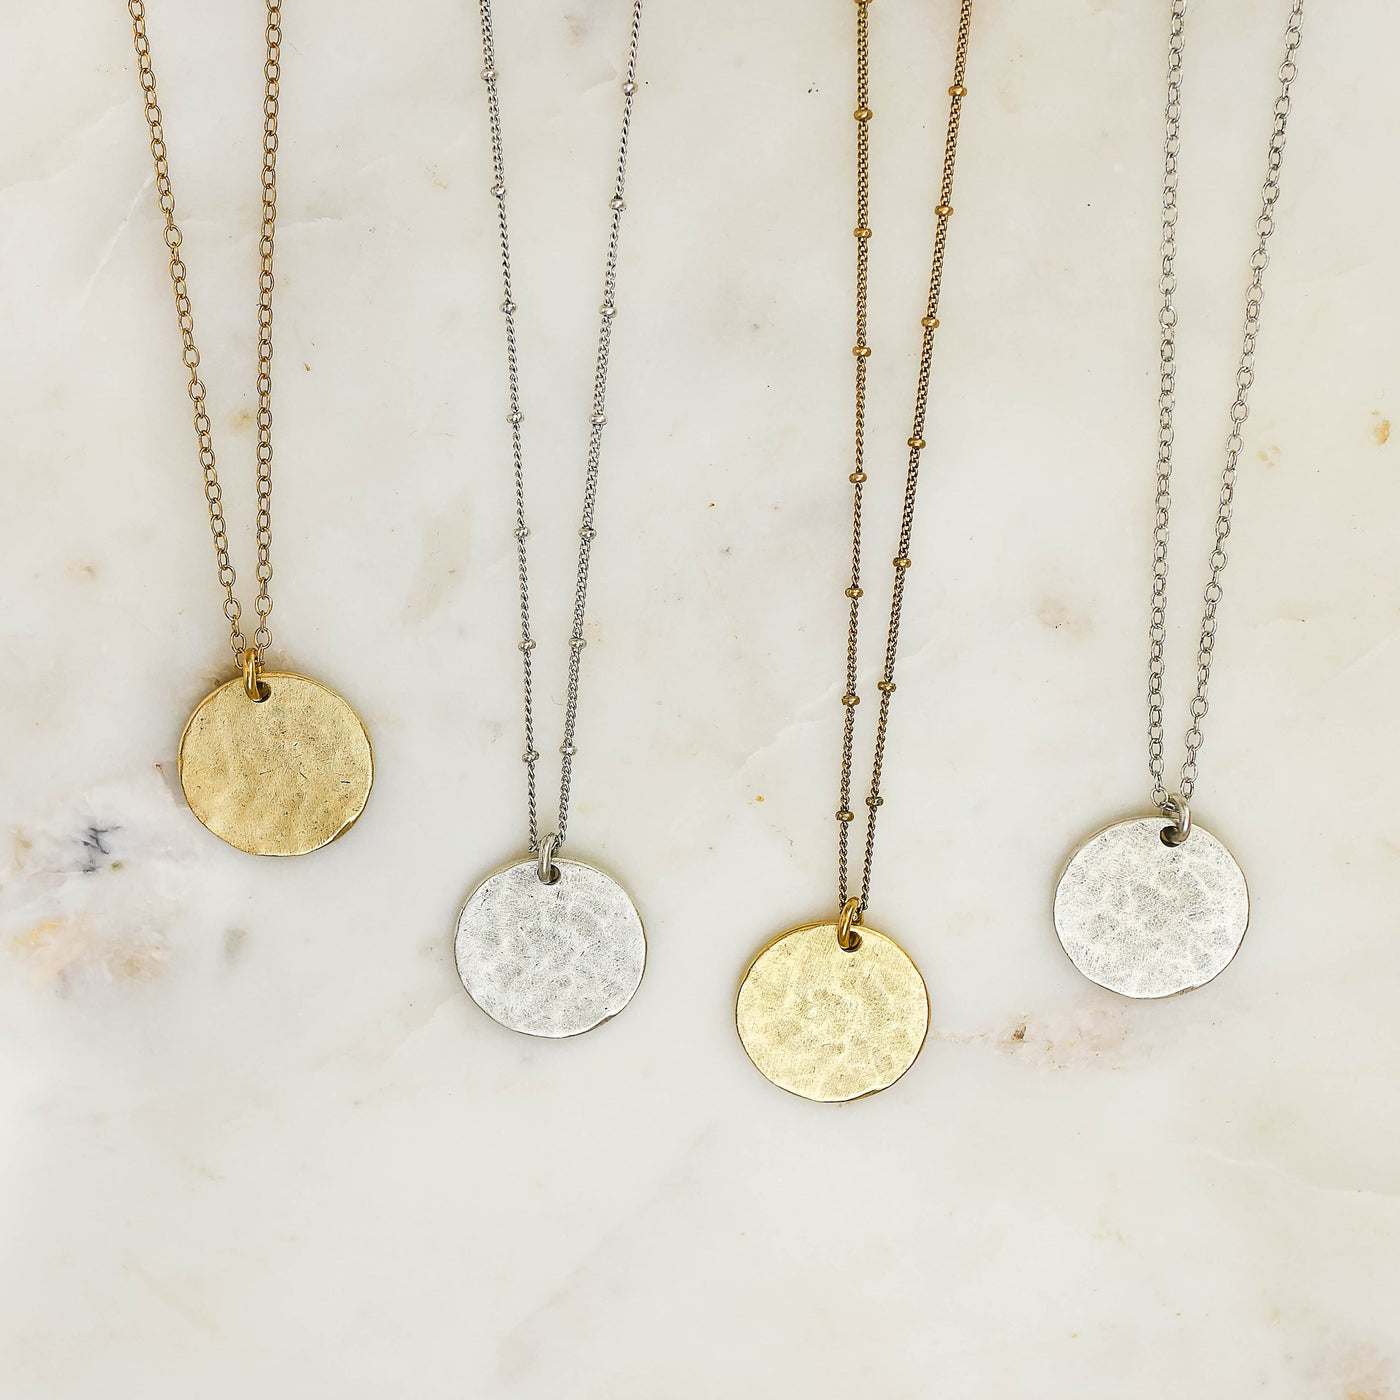 Topaz & Pearl Necklaces Hammered Coin Necklace